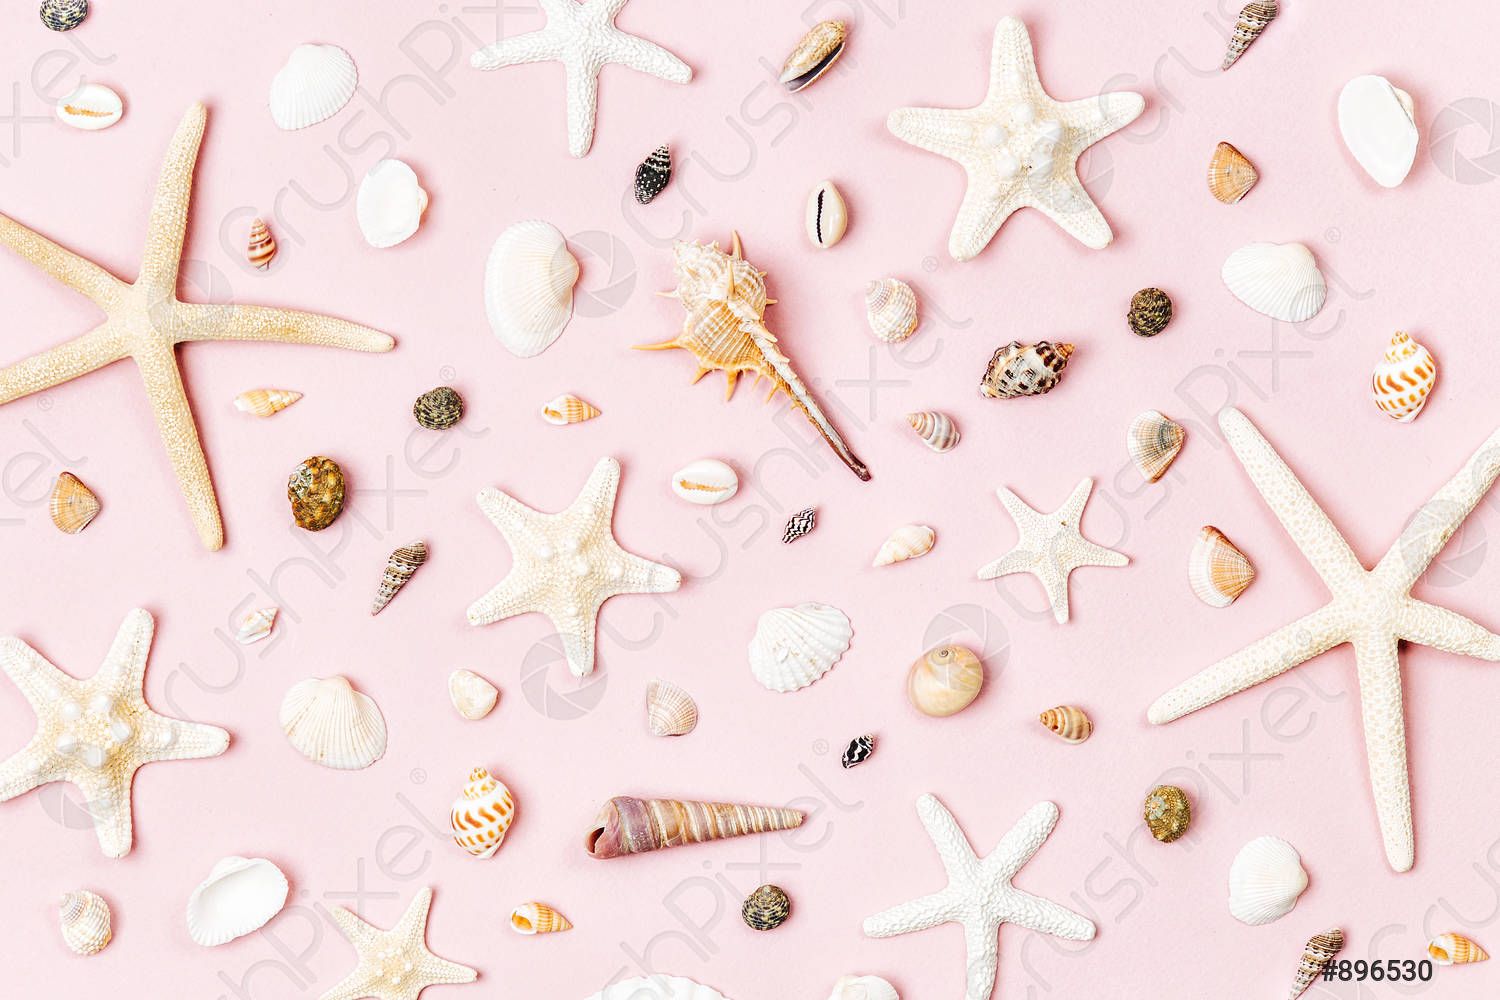 Seashells and starfish on a pale pink background Summer time